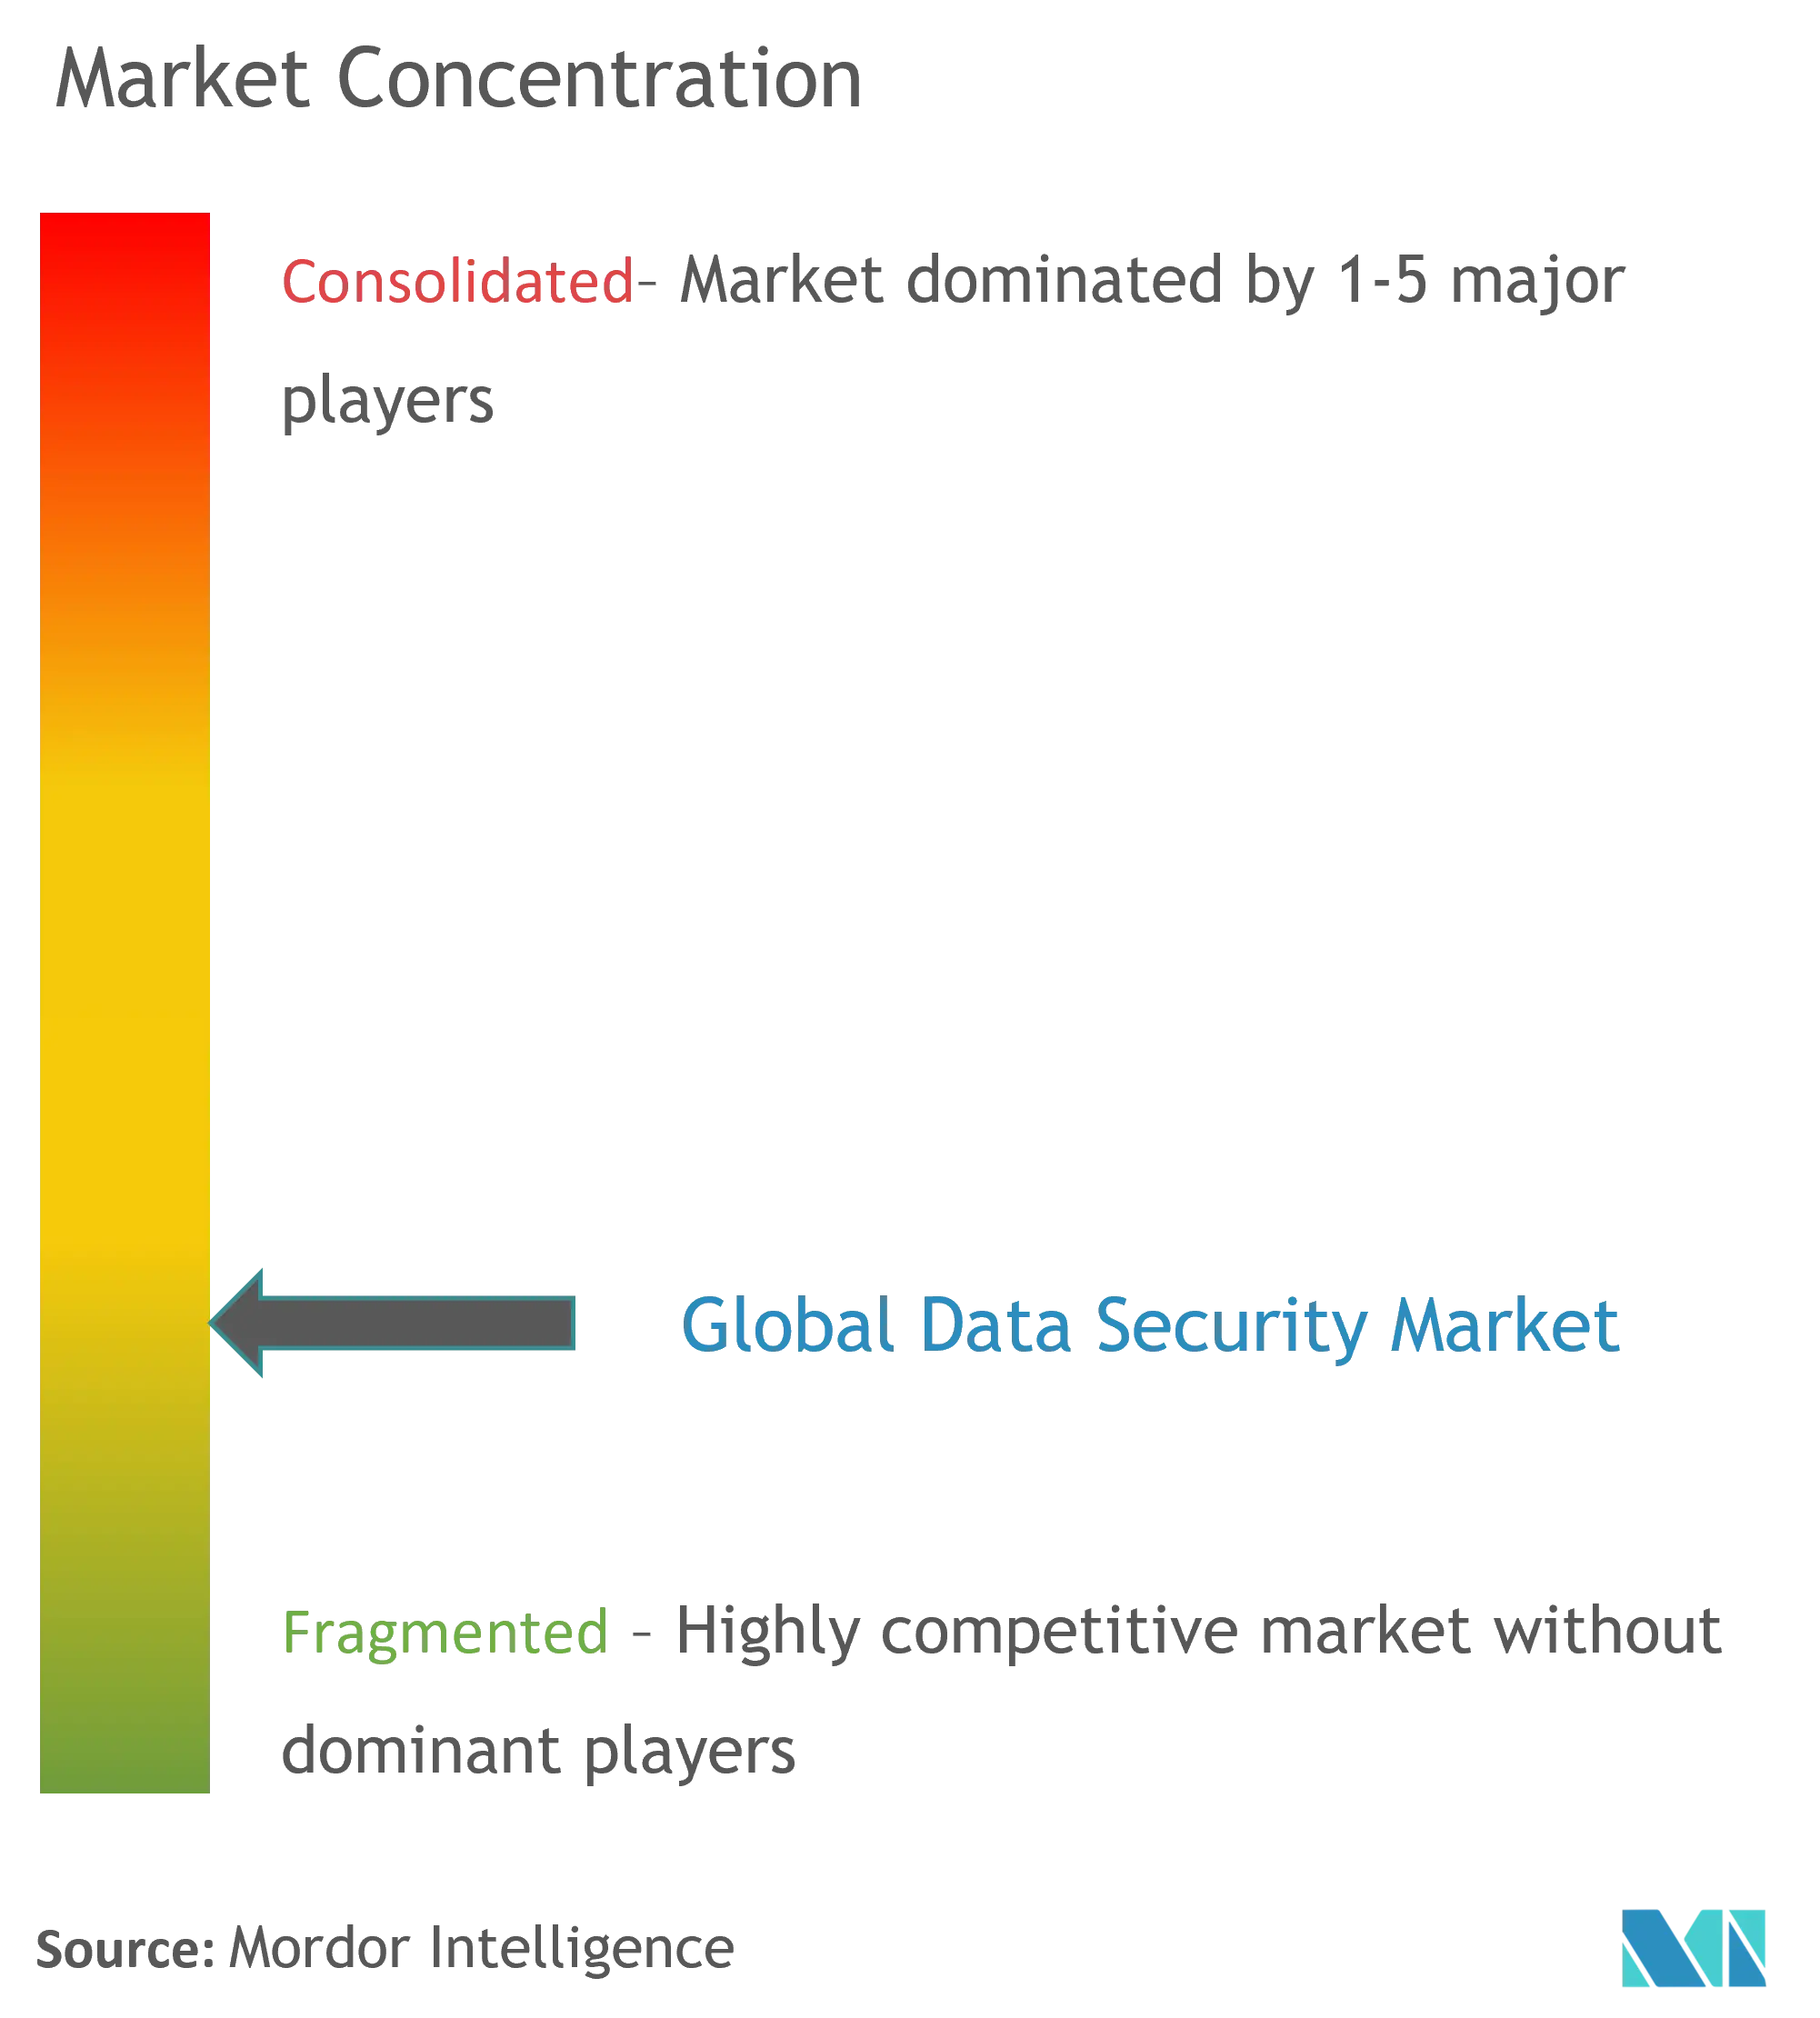 Data Security Market Concentration